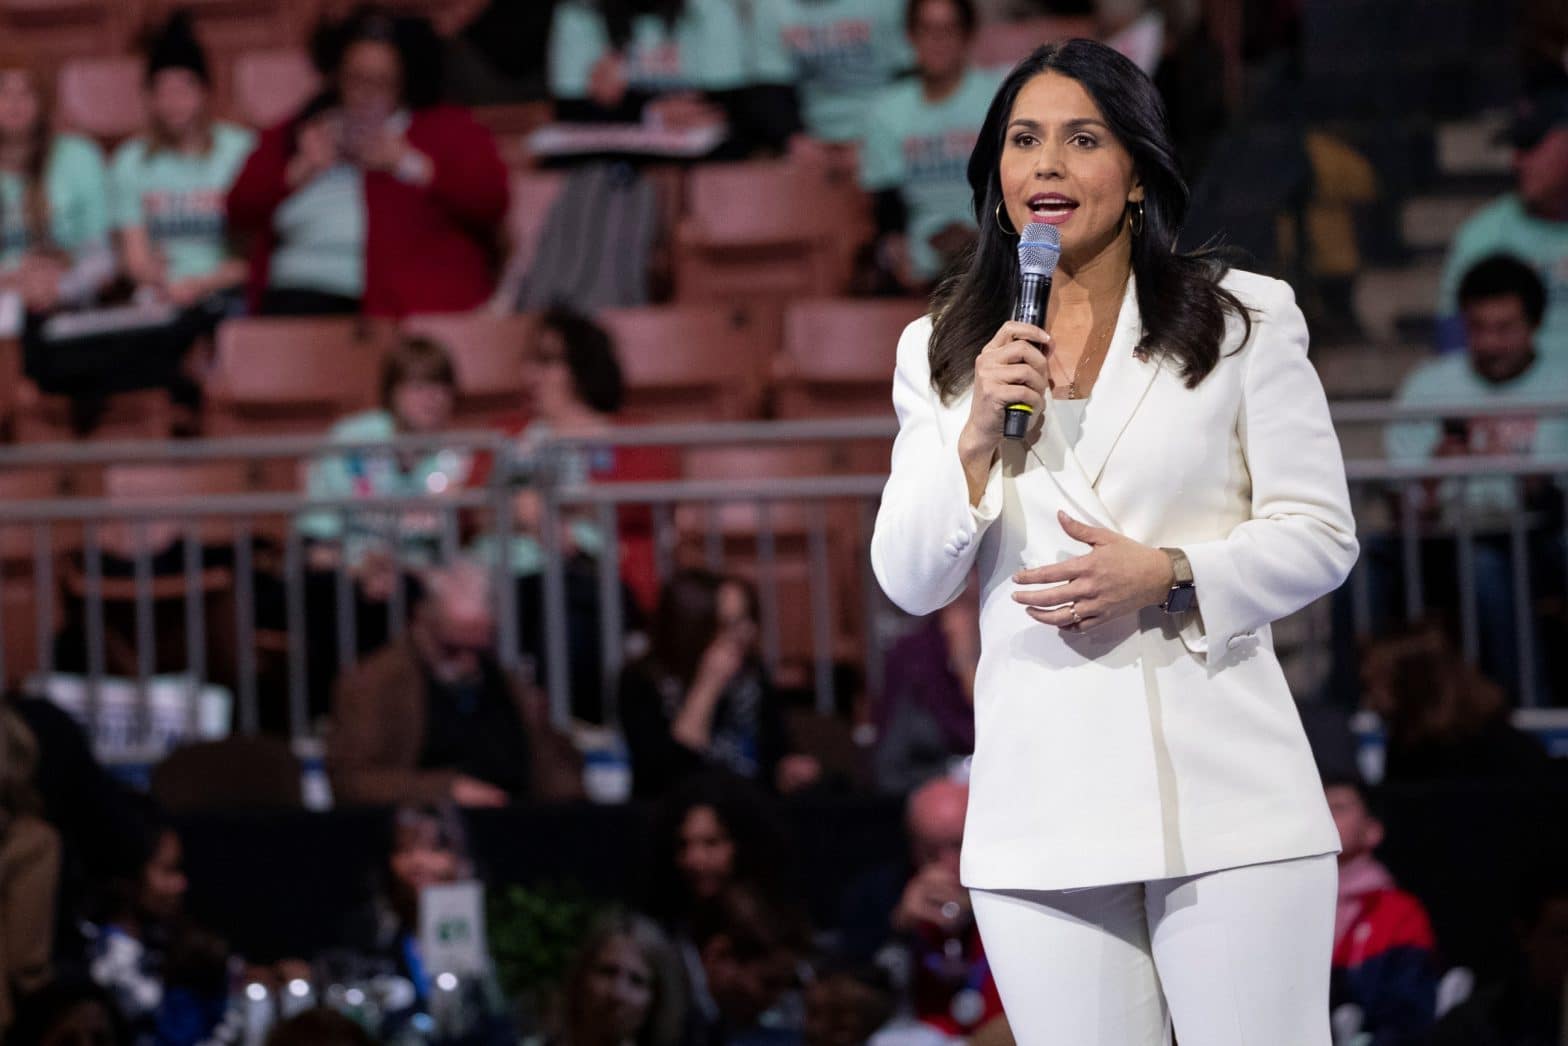 Gabbard, Weld Drop Out of 2020 Presidential Race